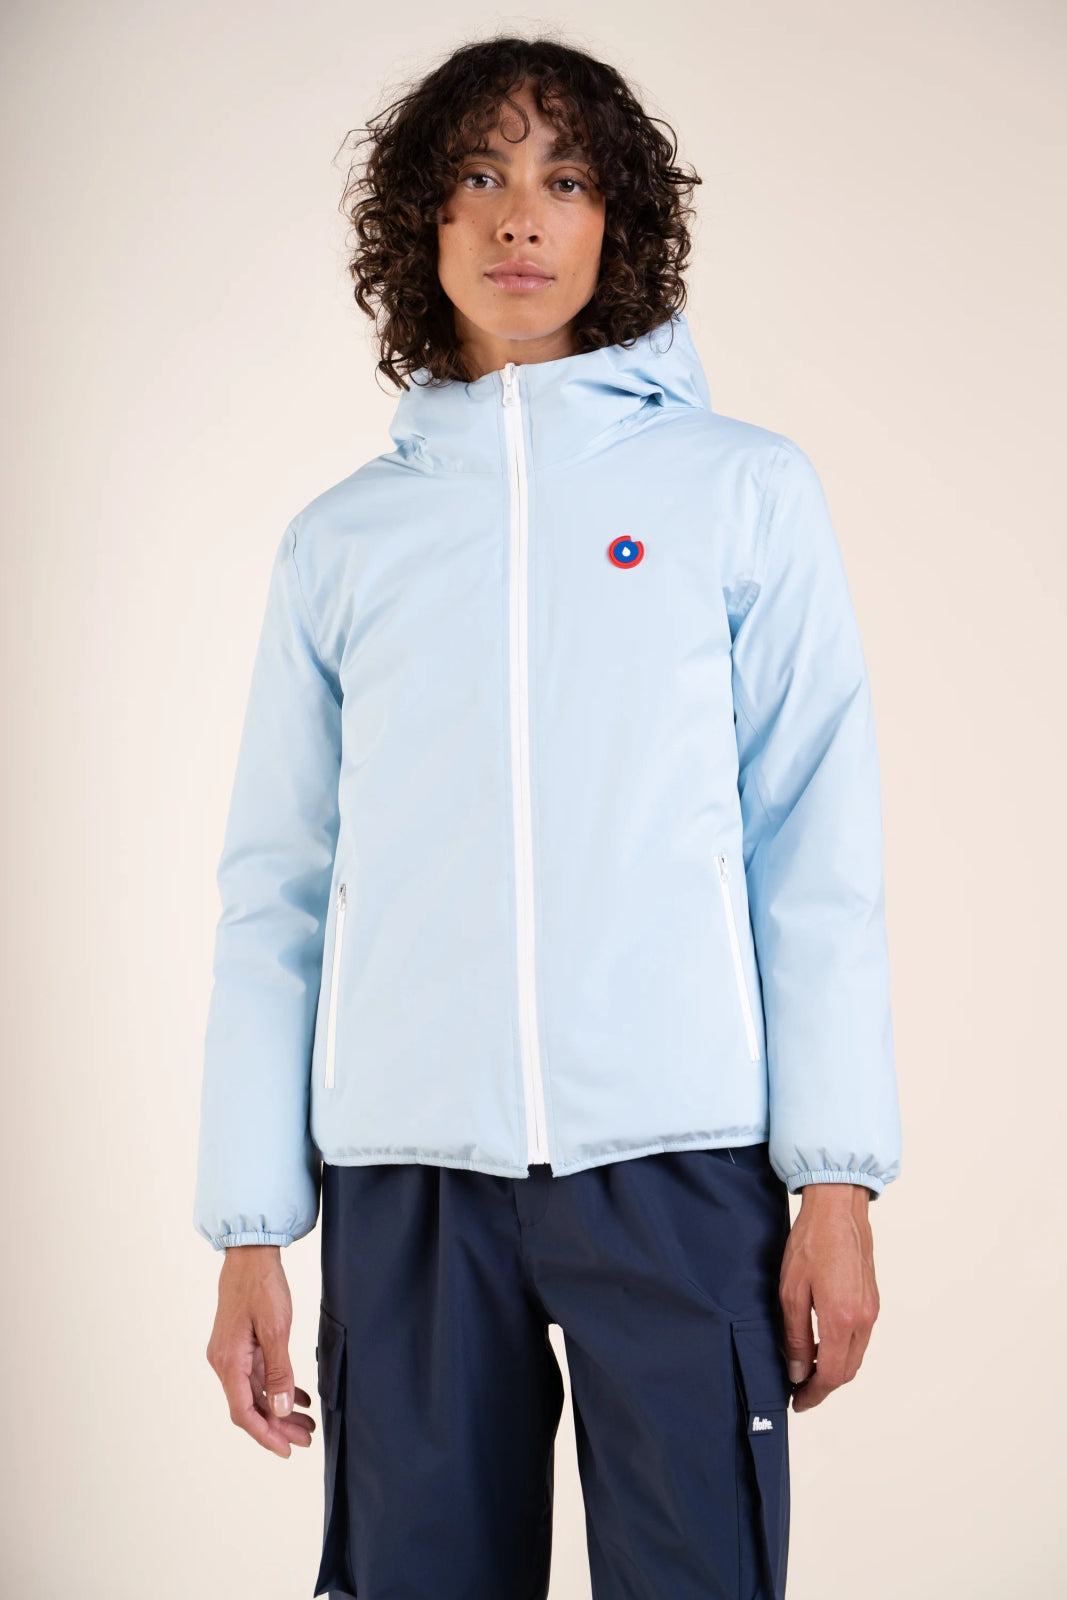 Charonne - Reversible down jacket - Flotte #couleur_coquille-iceberg